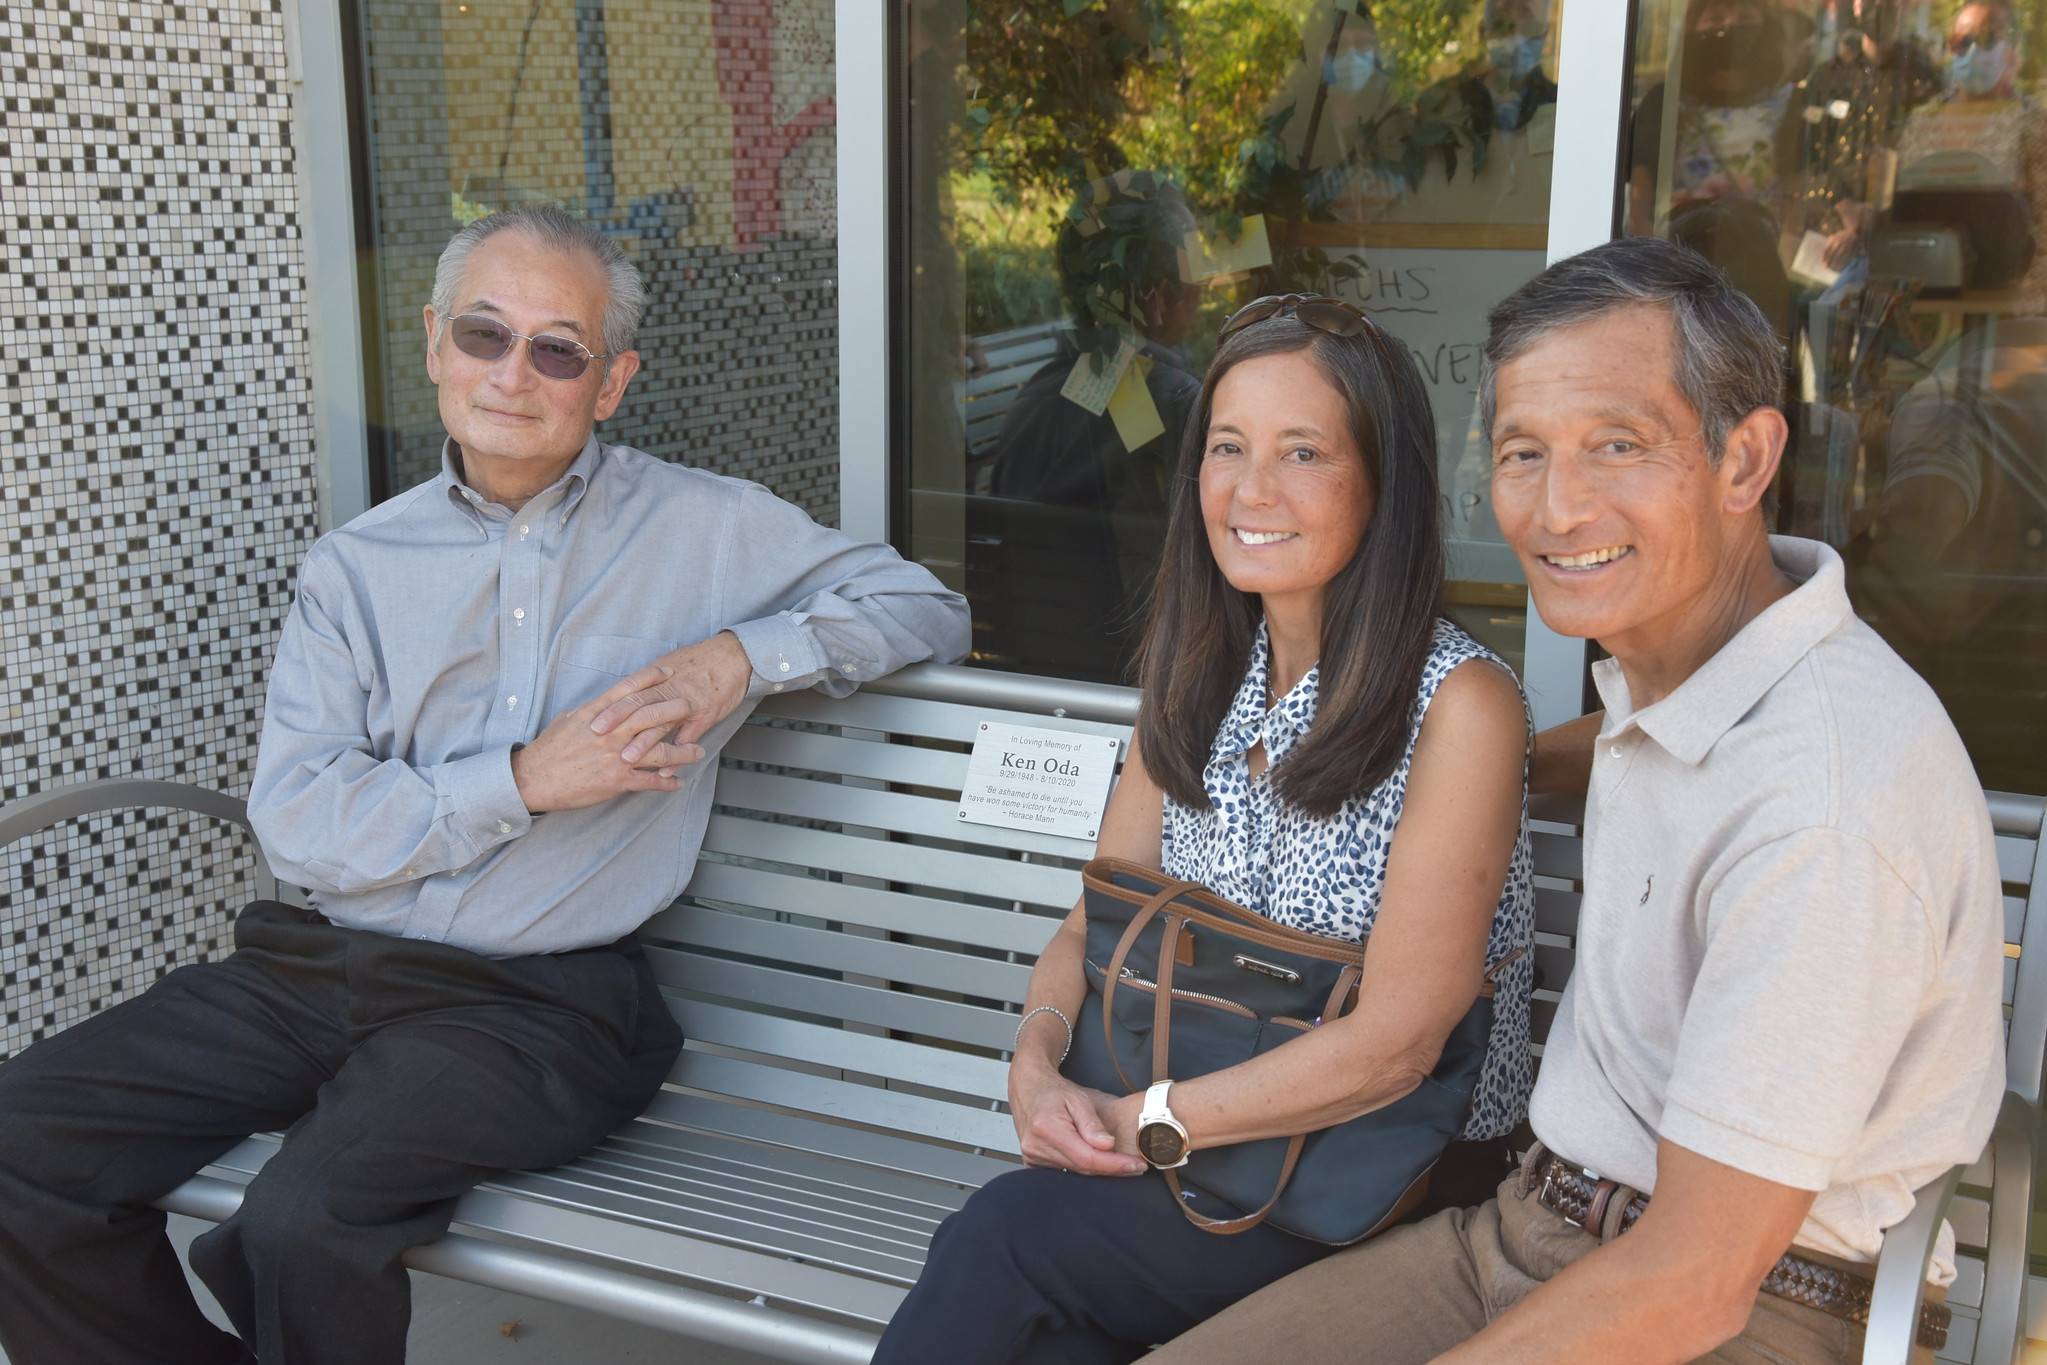 family on bench named after Ken Oda